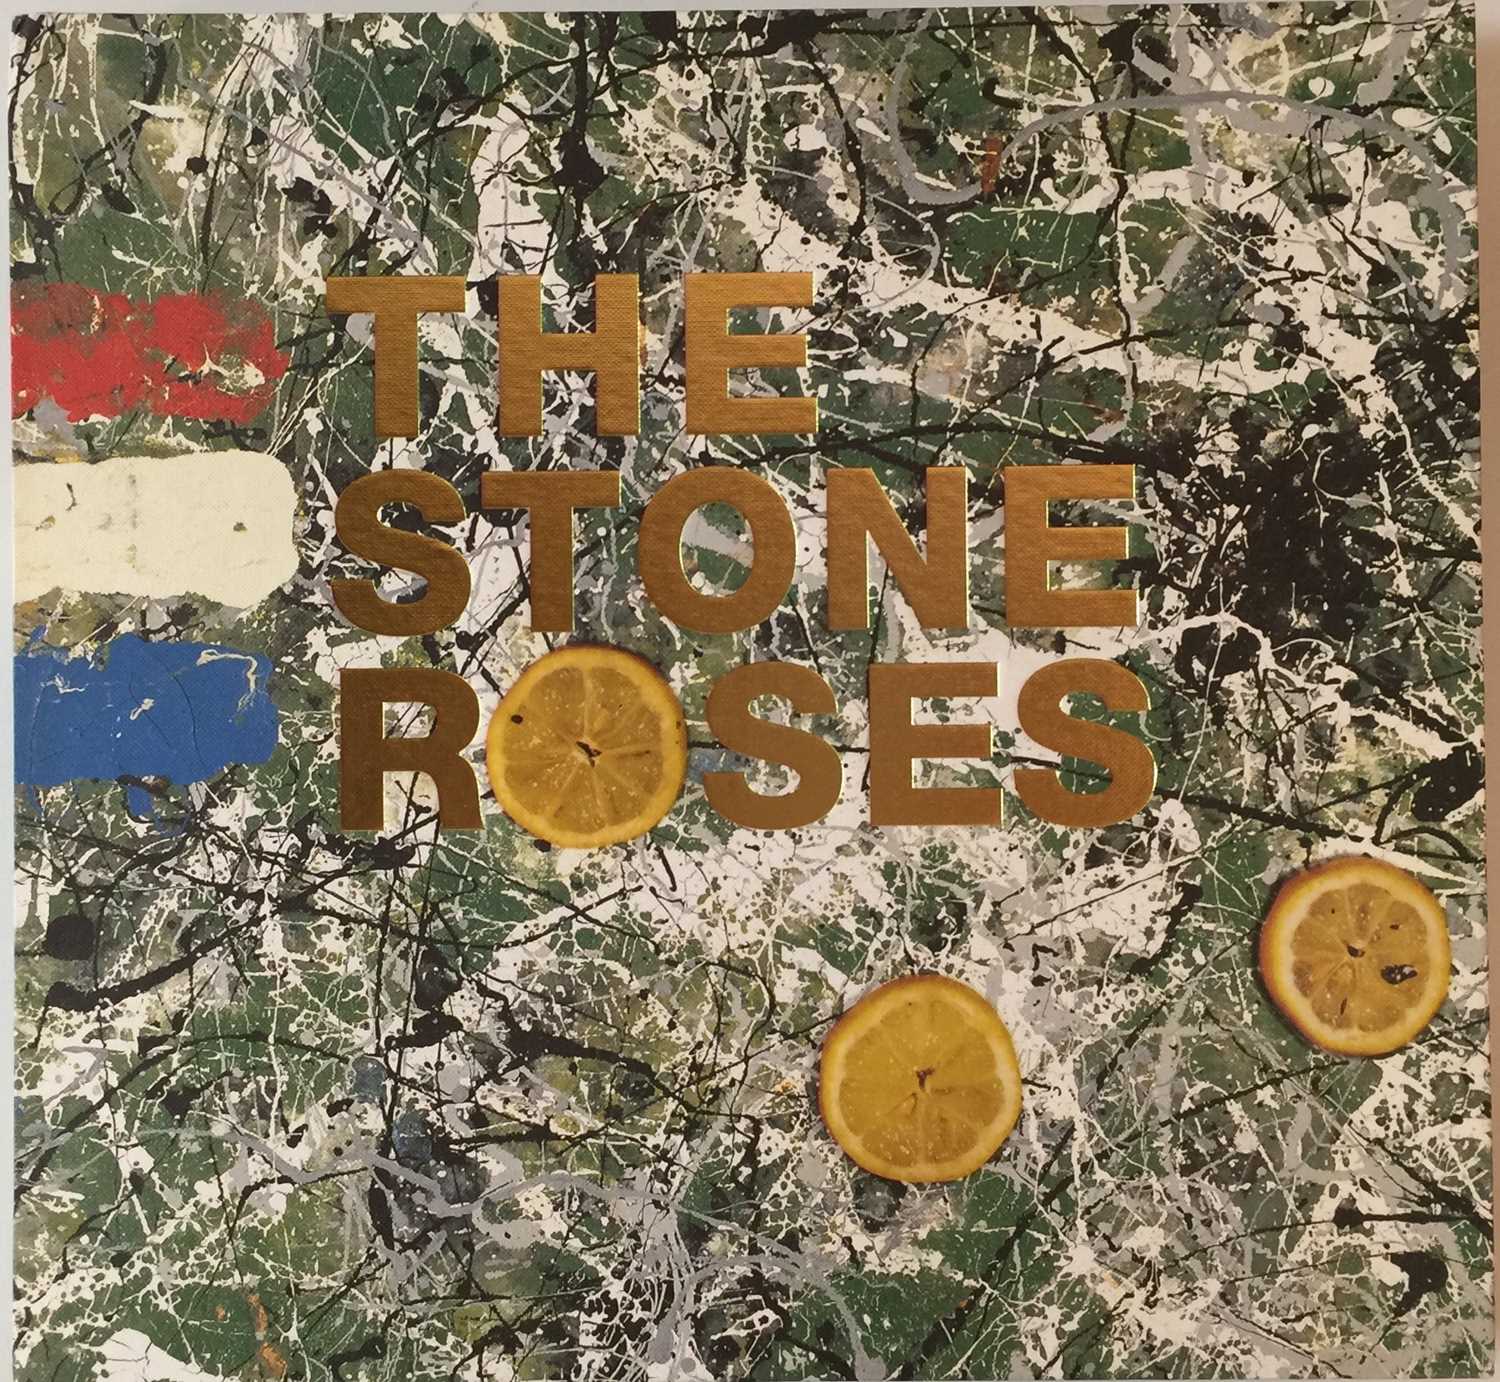 Lot 329 - THE STONE ROSES - THE STONE ROSES (2009 LIMITED EDITION LP/CD/DVD BOX SET - SILVERTONE 88697430302)